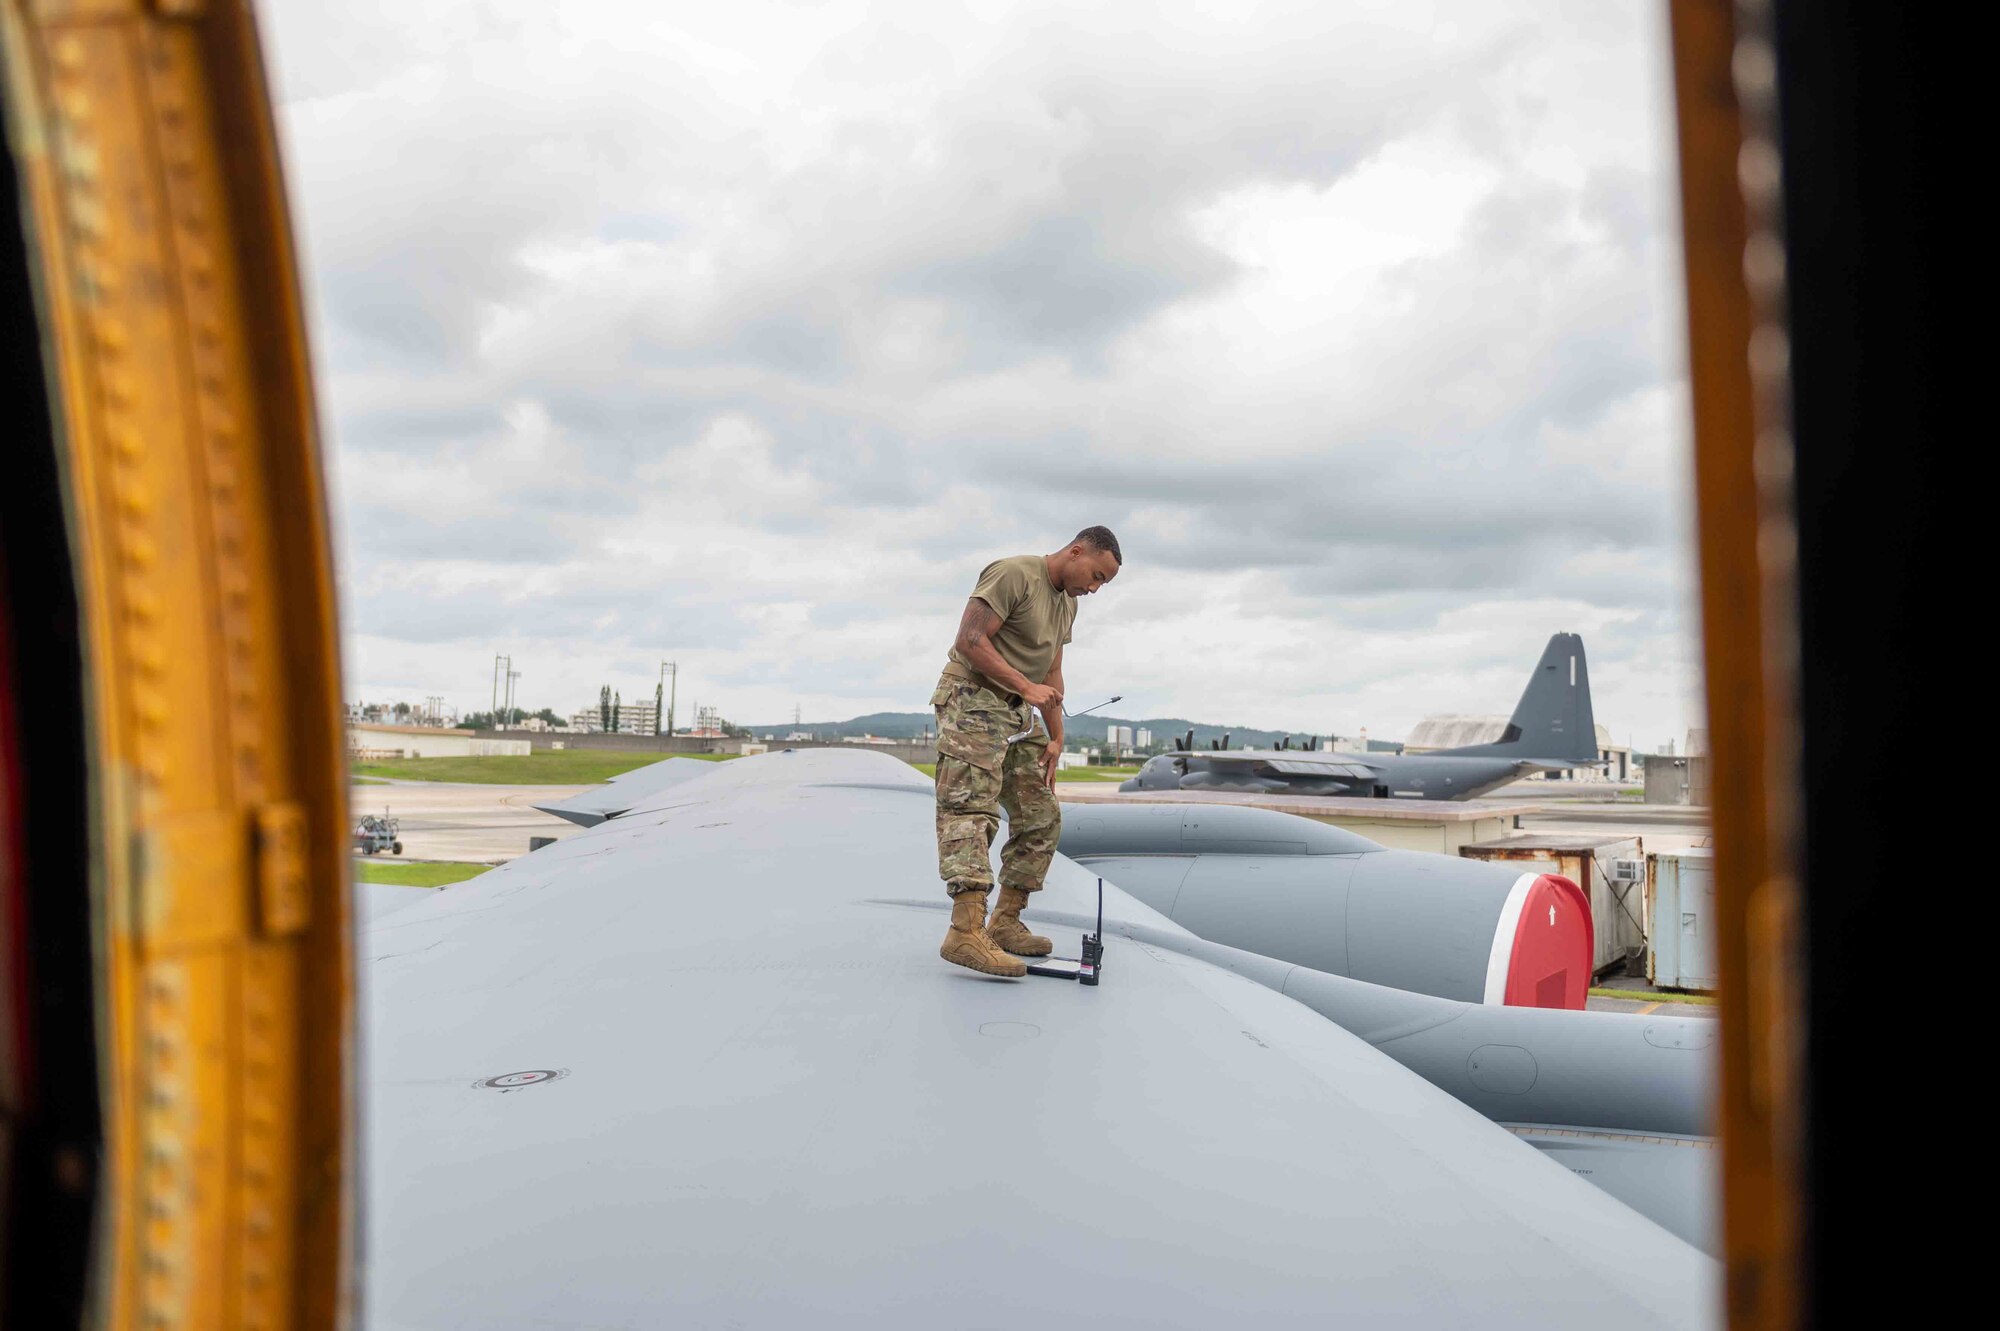 Airman stands on the wing of an aircraft